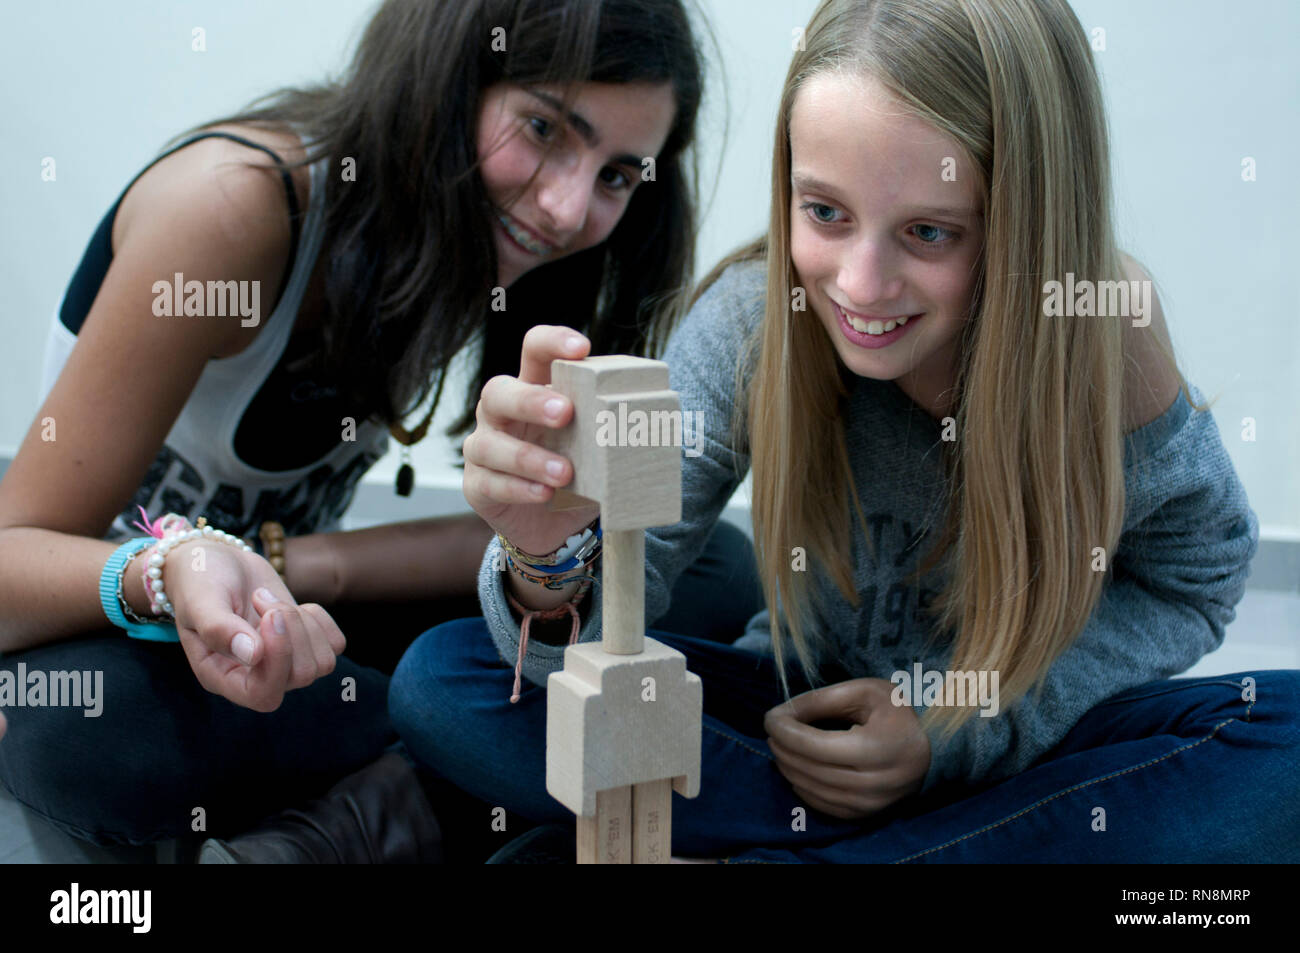 Some 4,500 Spanish children wear prostheses because they were born without a limb, or because they have suffered a traumatic amputation, or because of Stock Photo